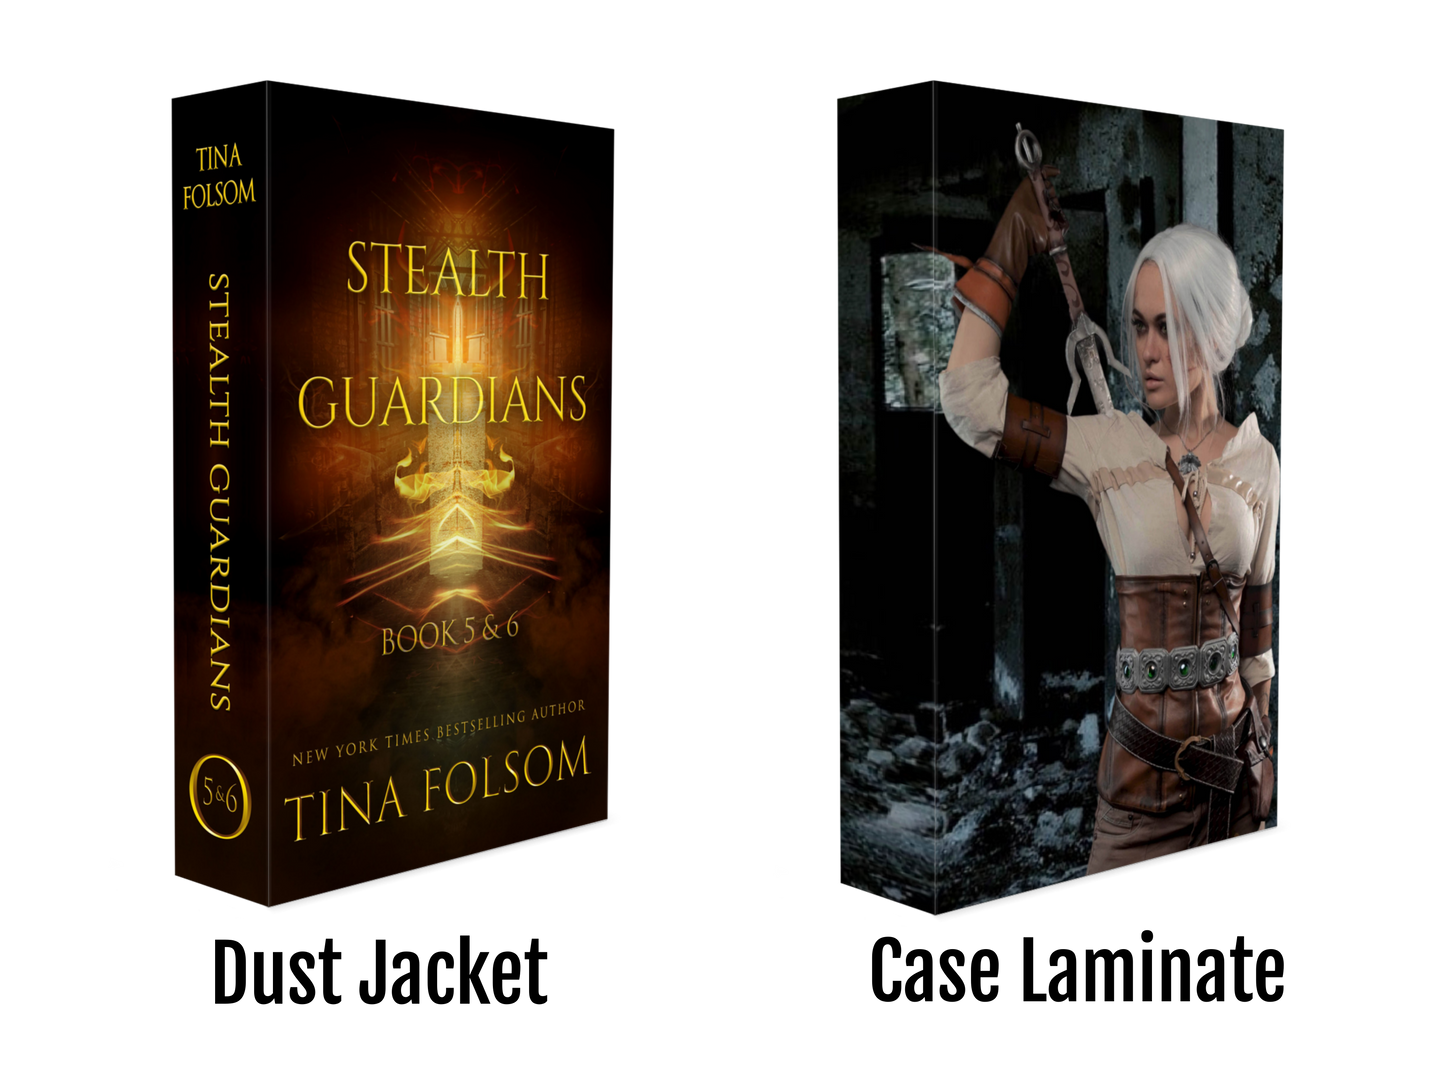 Stealth Guardians (Book 5 & 6)